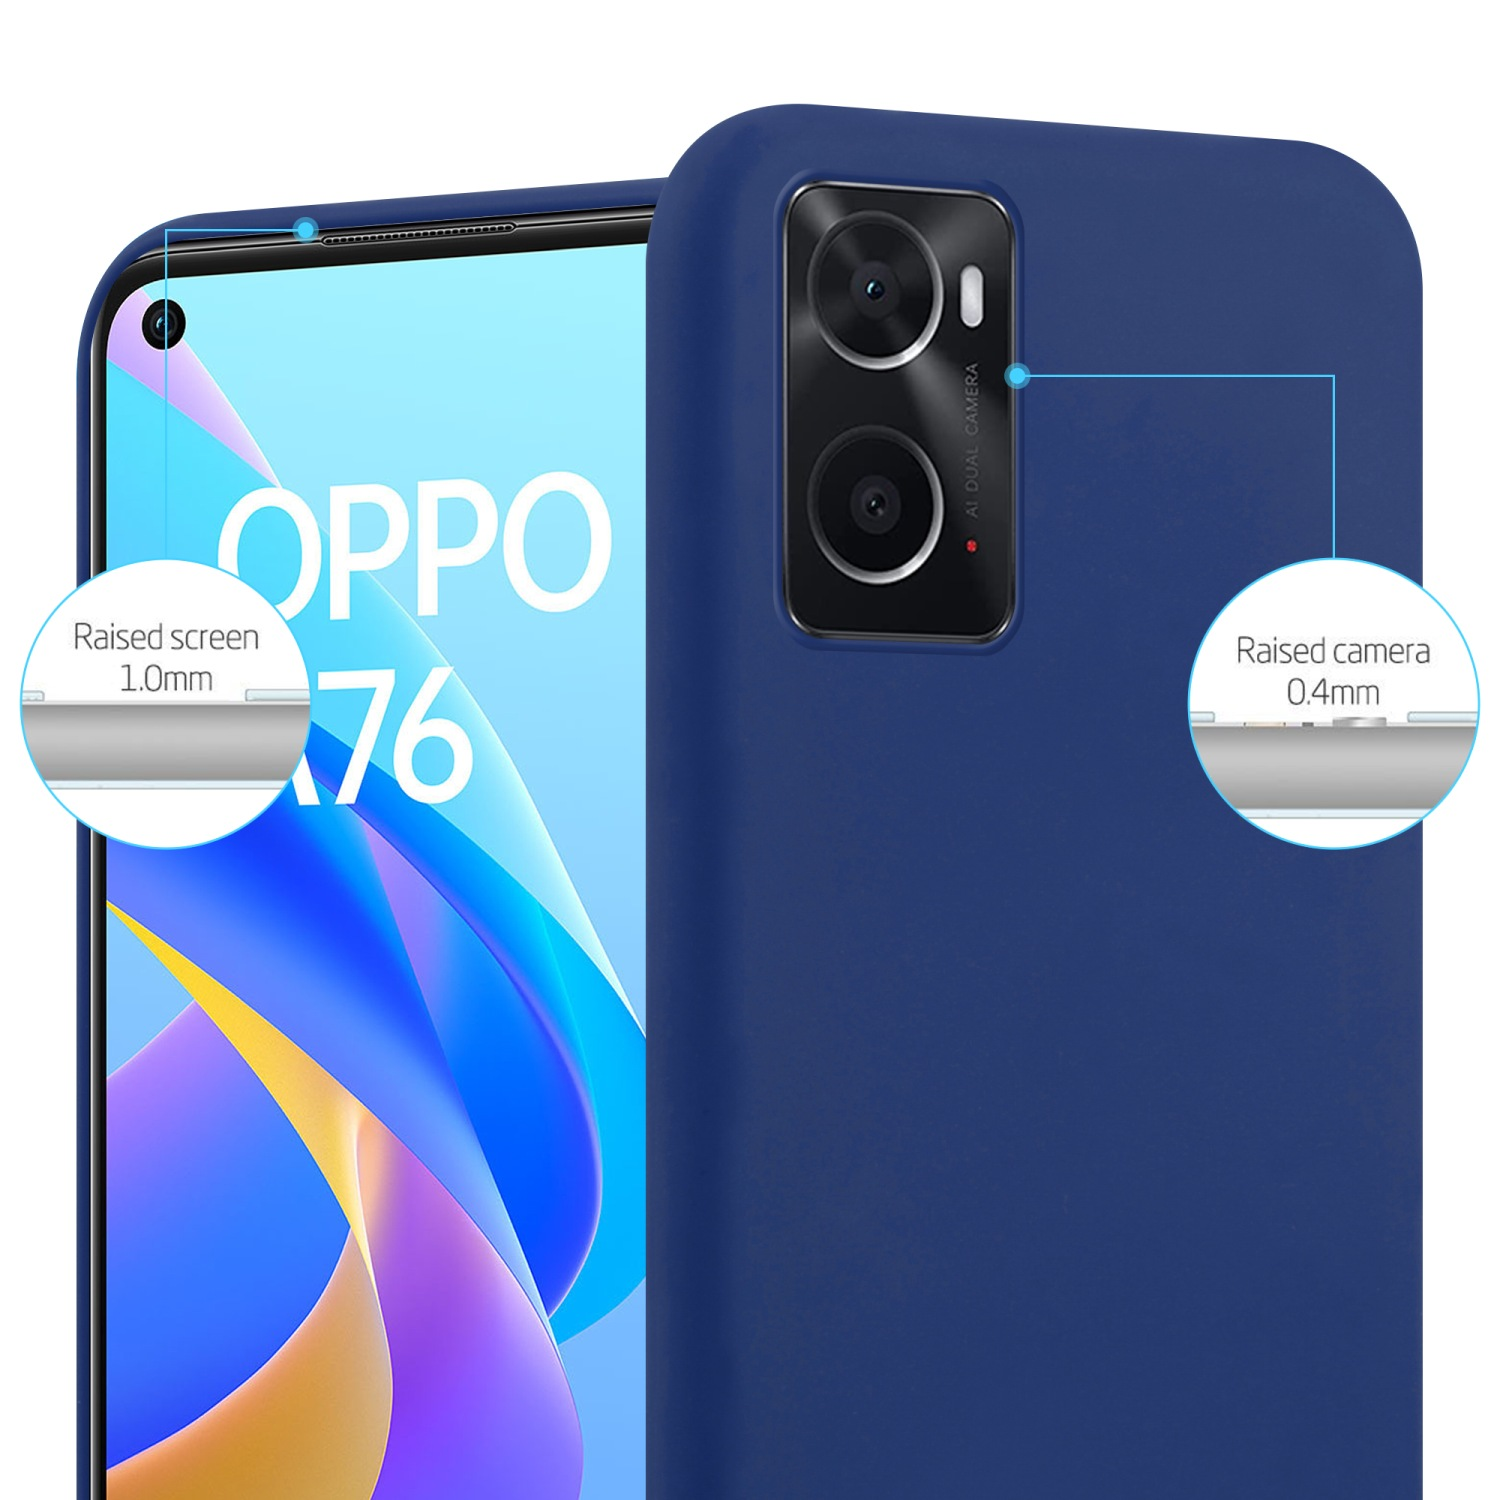 BLAU Backcover, K10 TPU Oppo, Candy 4G / 4G A76 / CADORABO / DUNKEL A96 / Style, CANDY A36 im 9i, Hülle Realme